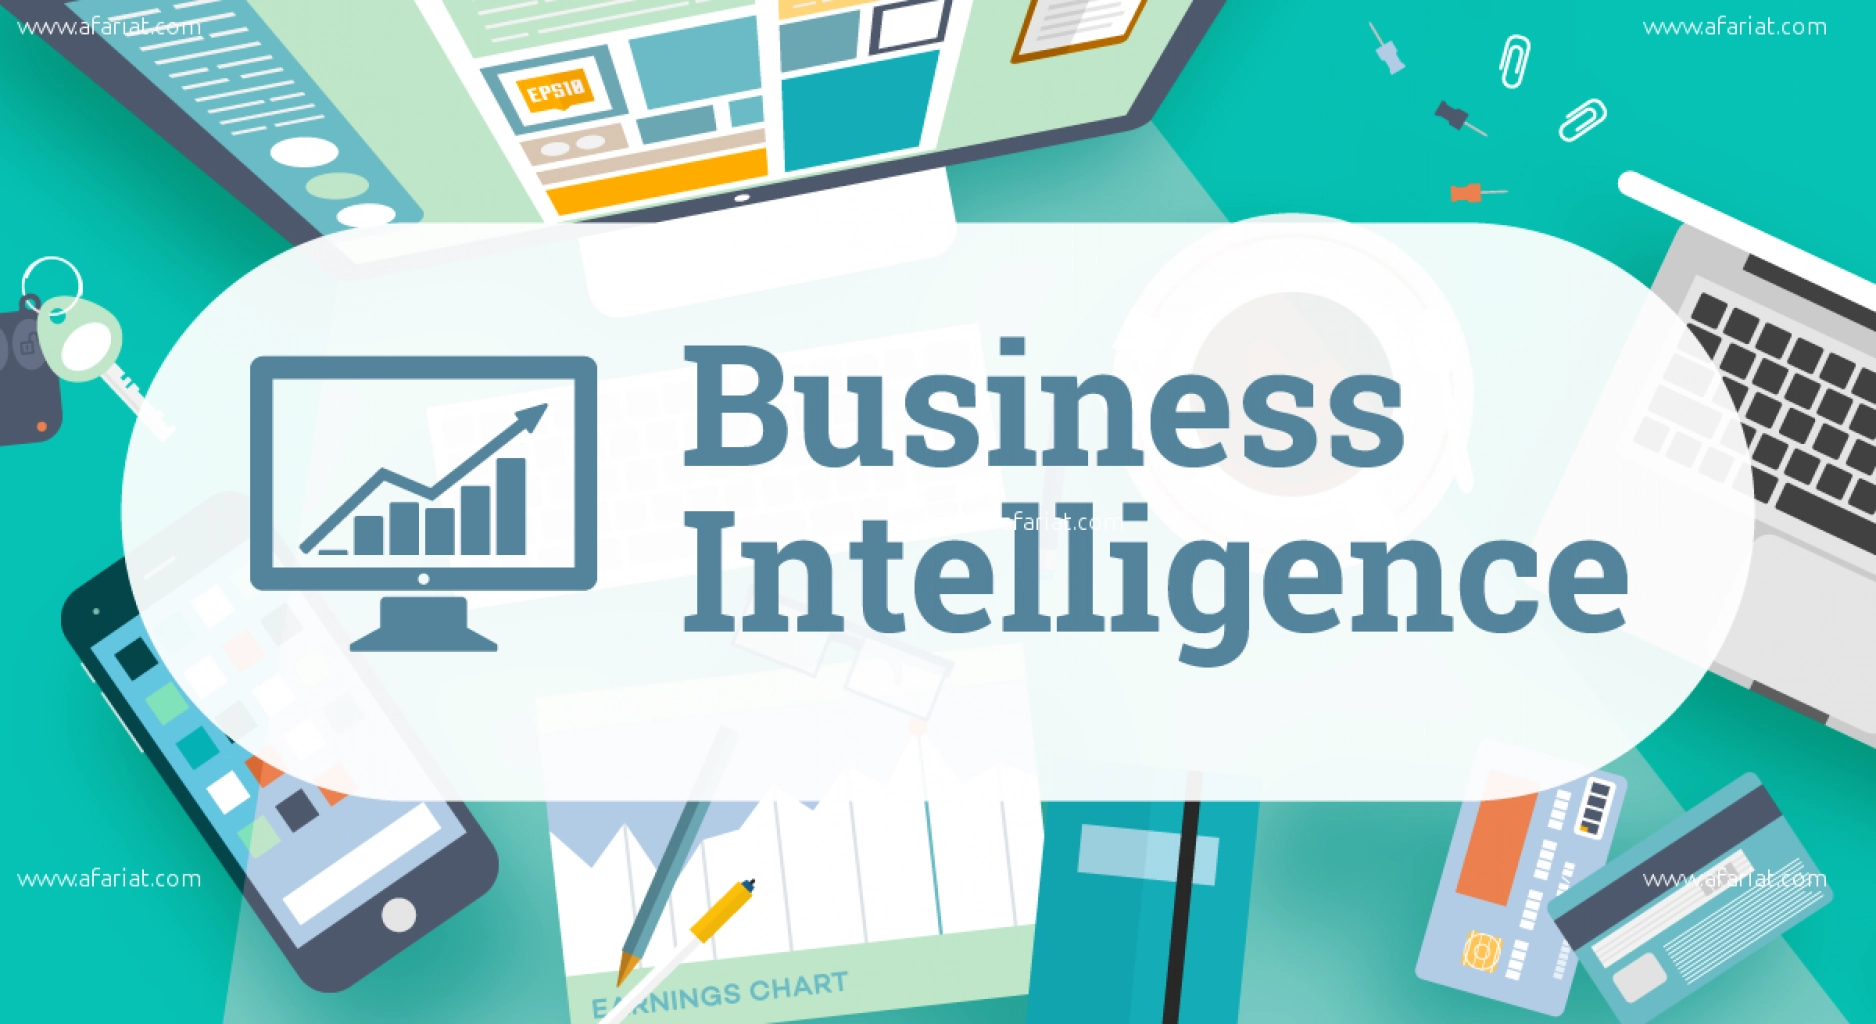 Formation Business Intelligence